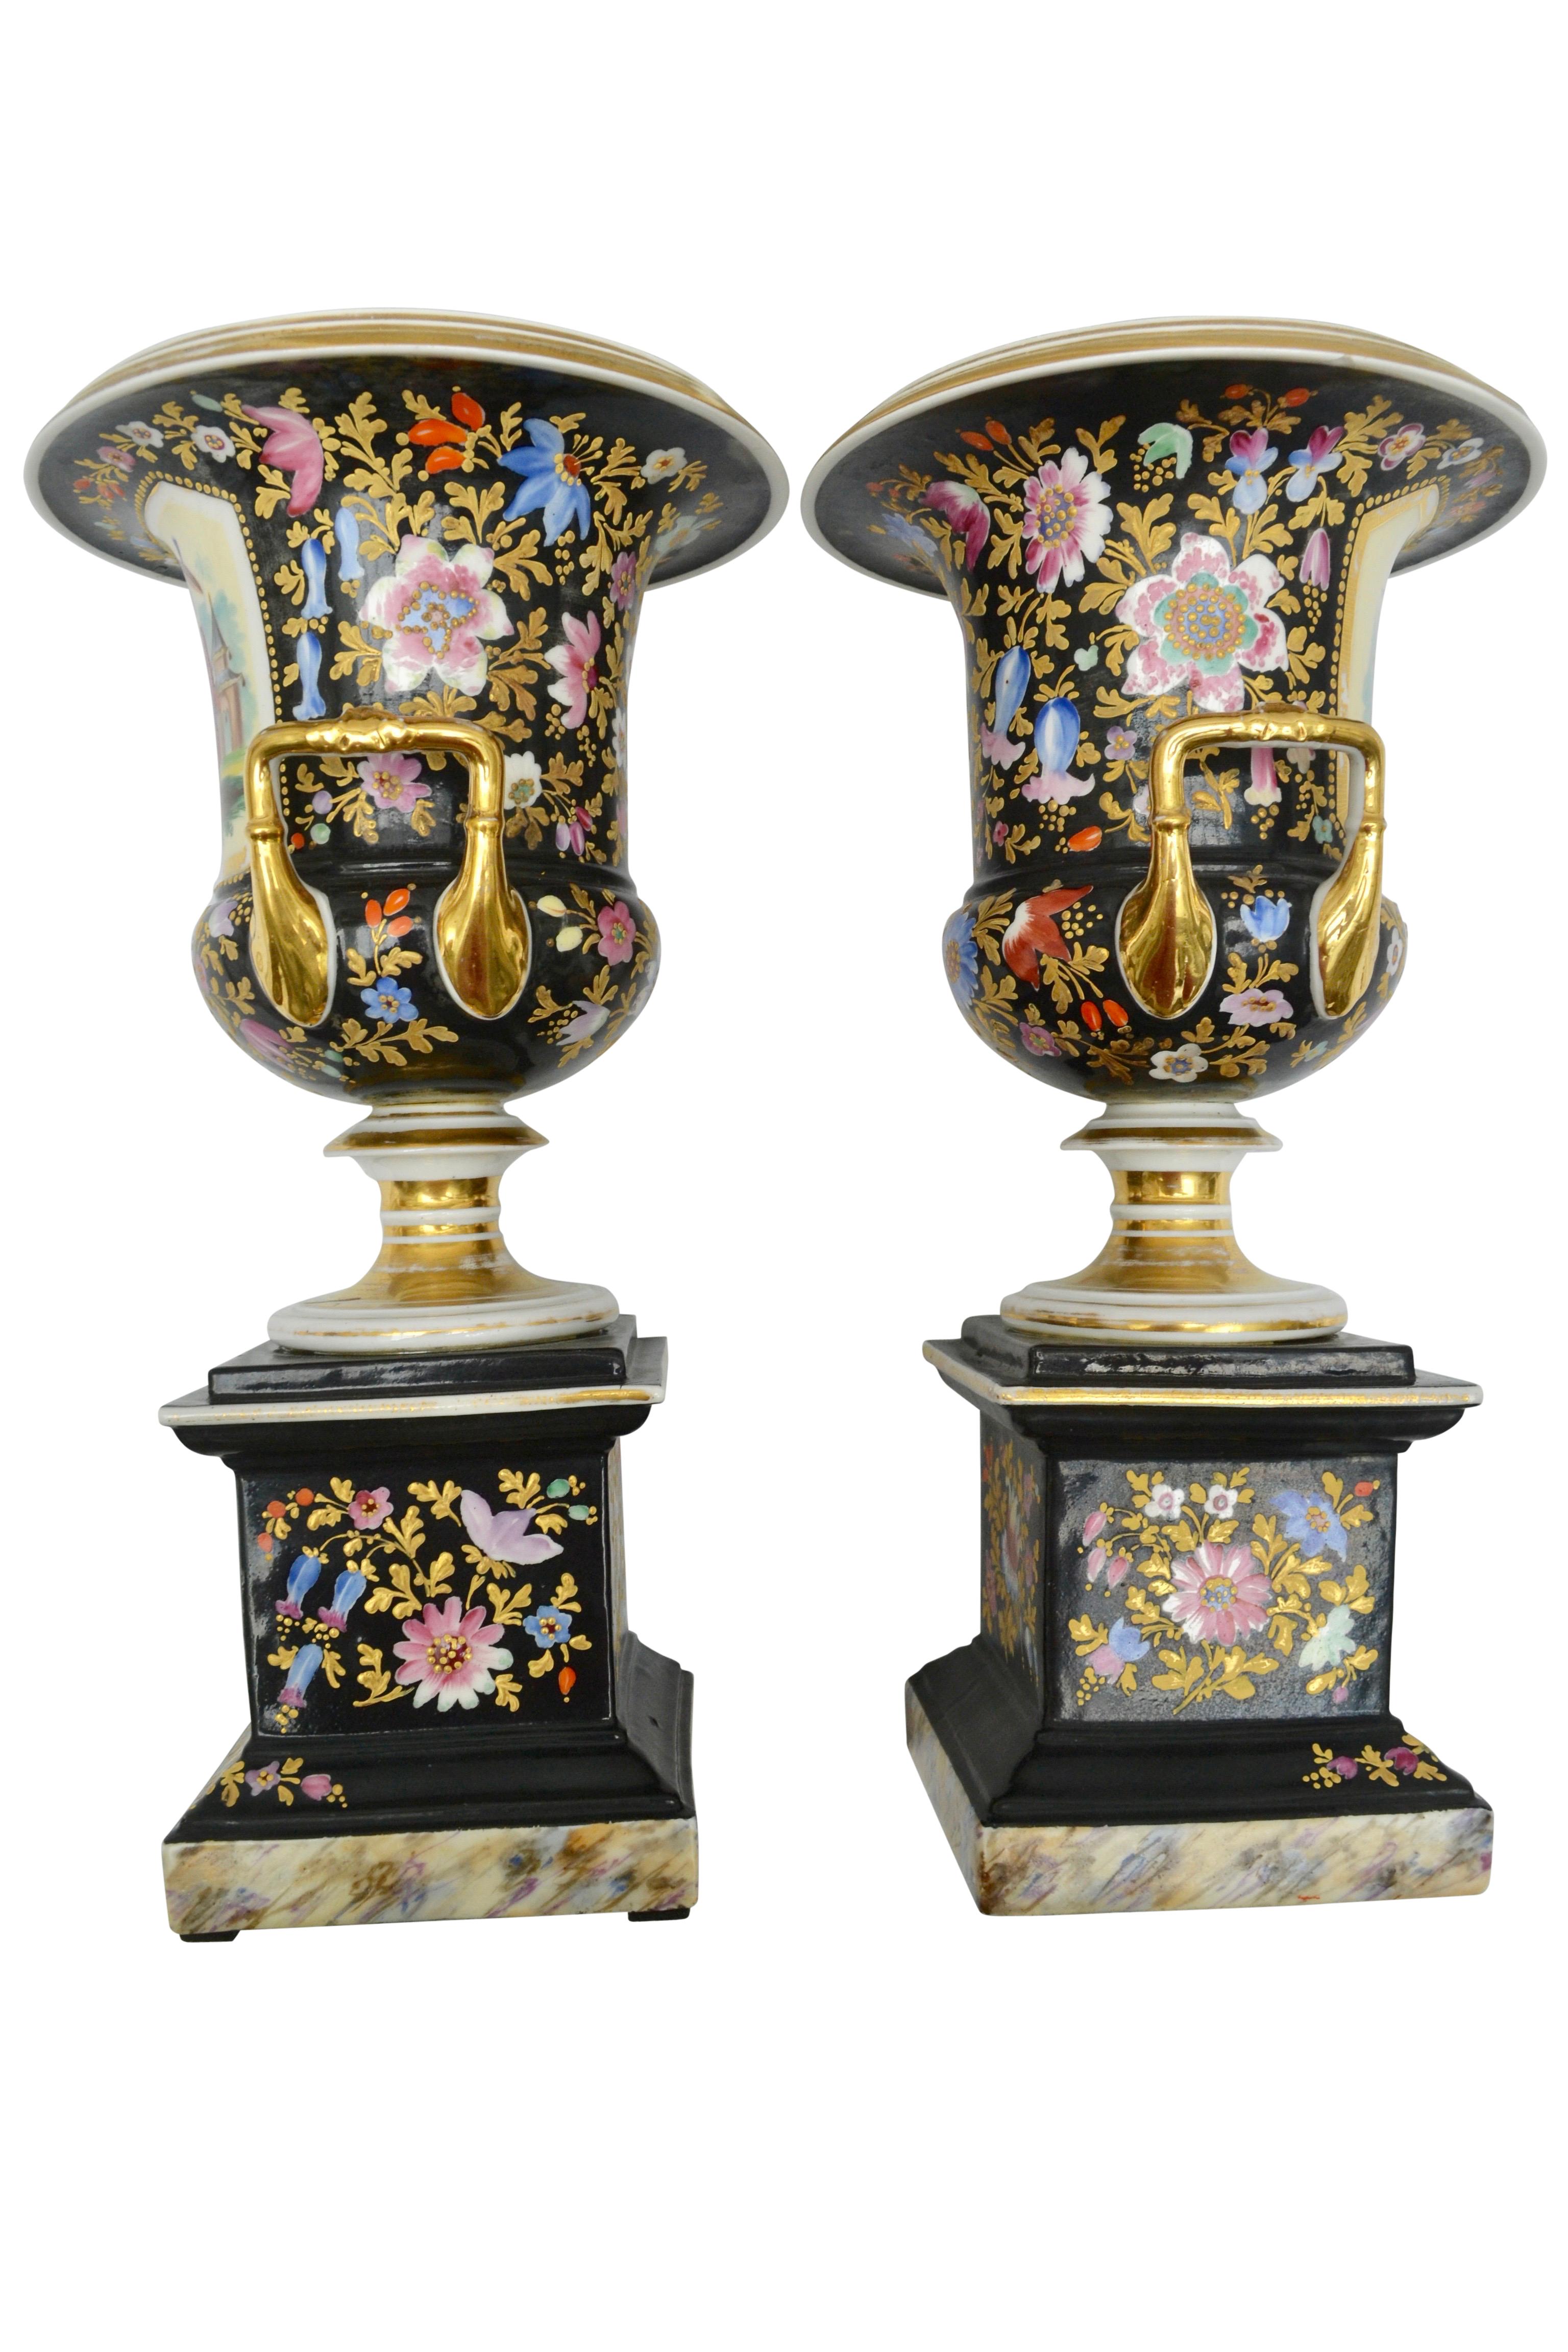 A pair of French campana shaped urns with chinoiserie painted and gilded figurative and floral decoration, that was very popular in the mid-19th century in Europe especially France and England. The vases are unsigned but in the style of Jacob Petite.